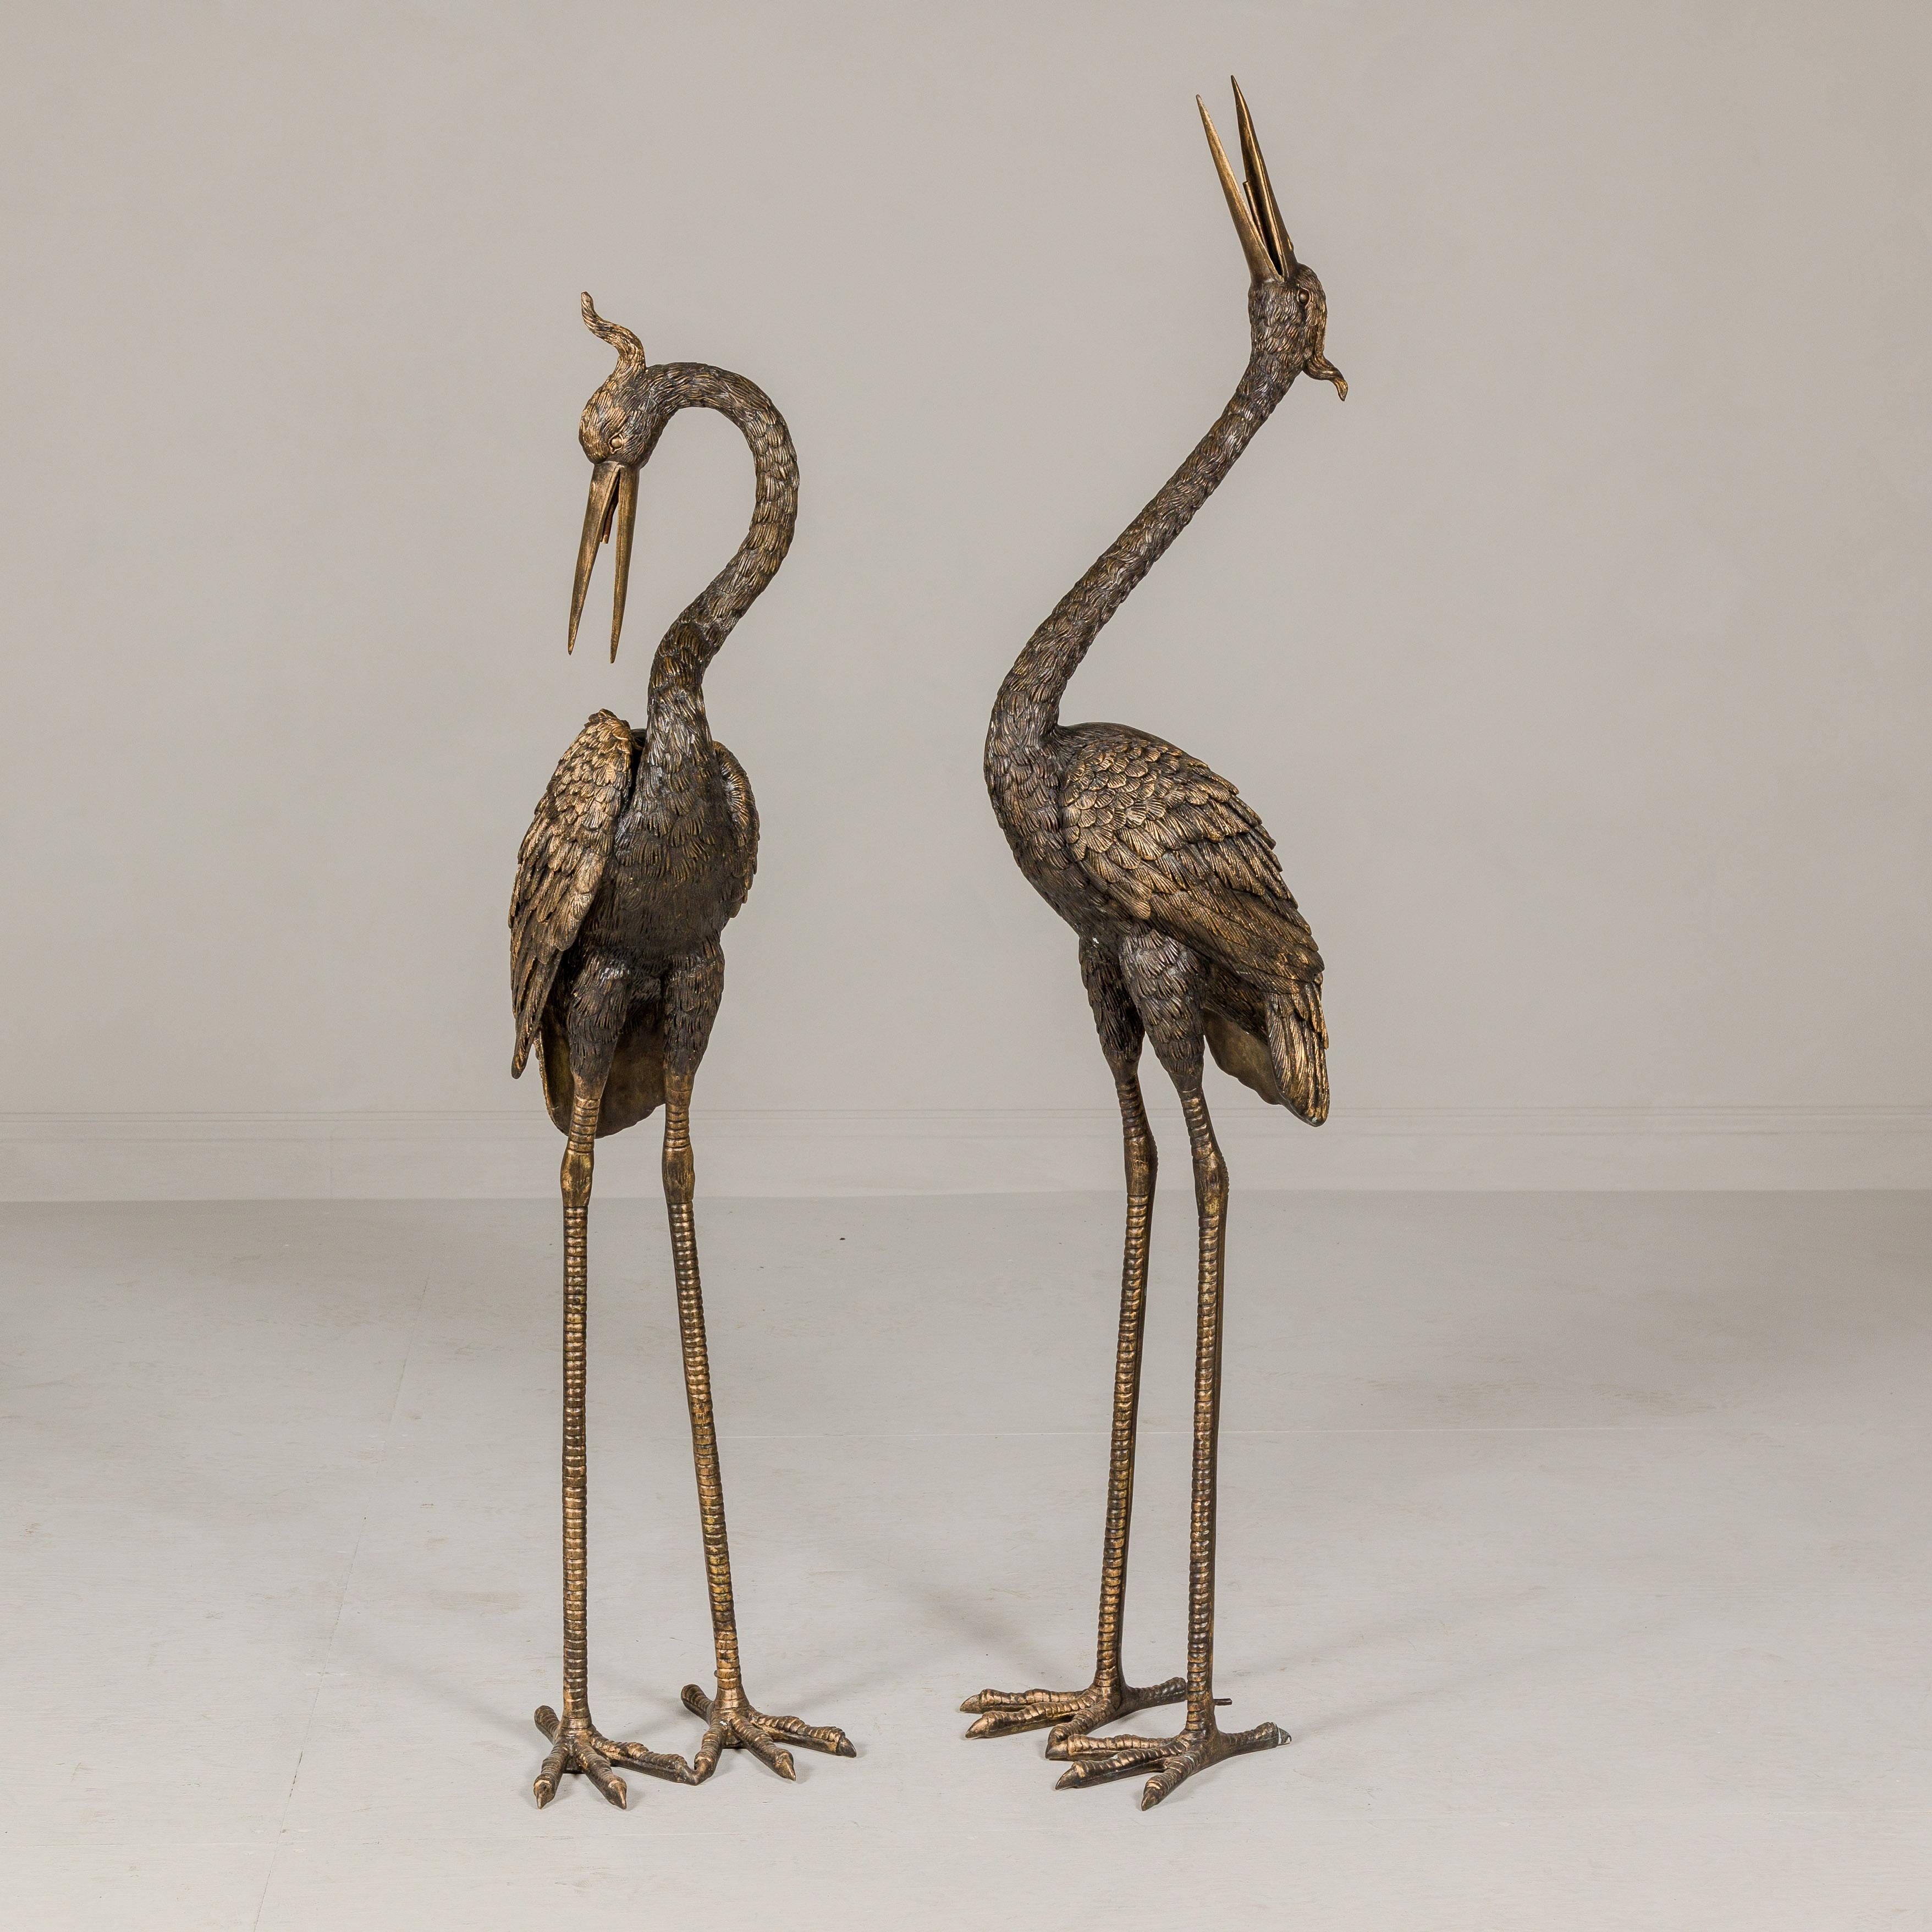 A pair of bronze Manchurian red crested crane sculptures in golden patina, tubed as fountains. Immerse yourself in the elegance and tranquility of these bronze Manchurian red-crested crane sculptures, current productions that bring the timeless